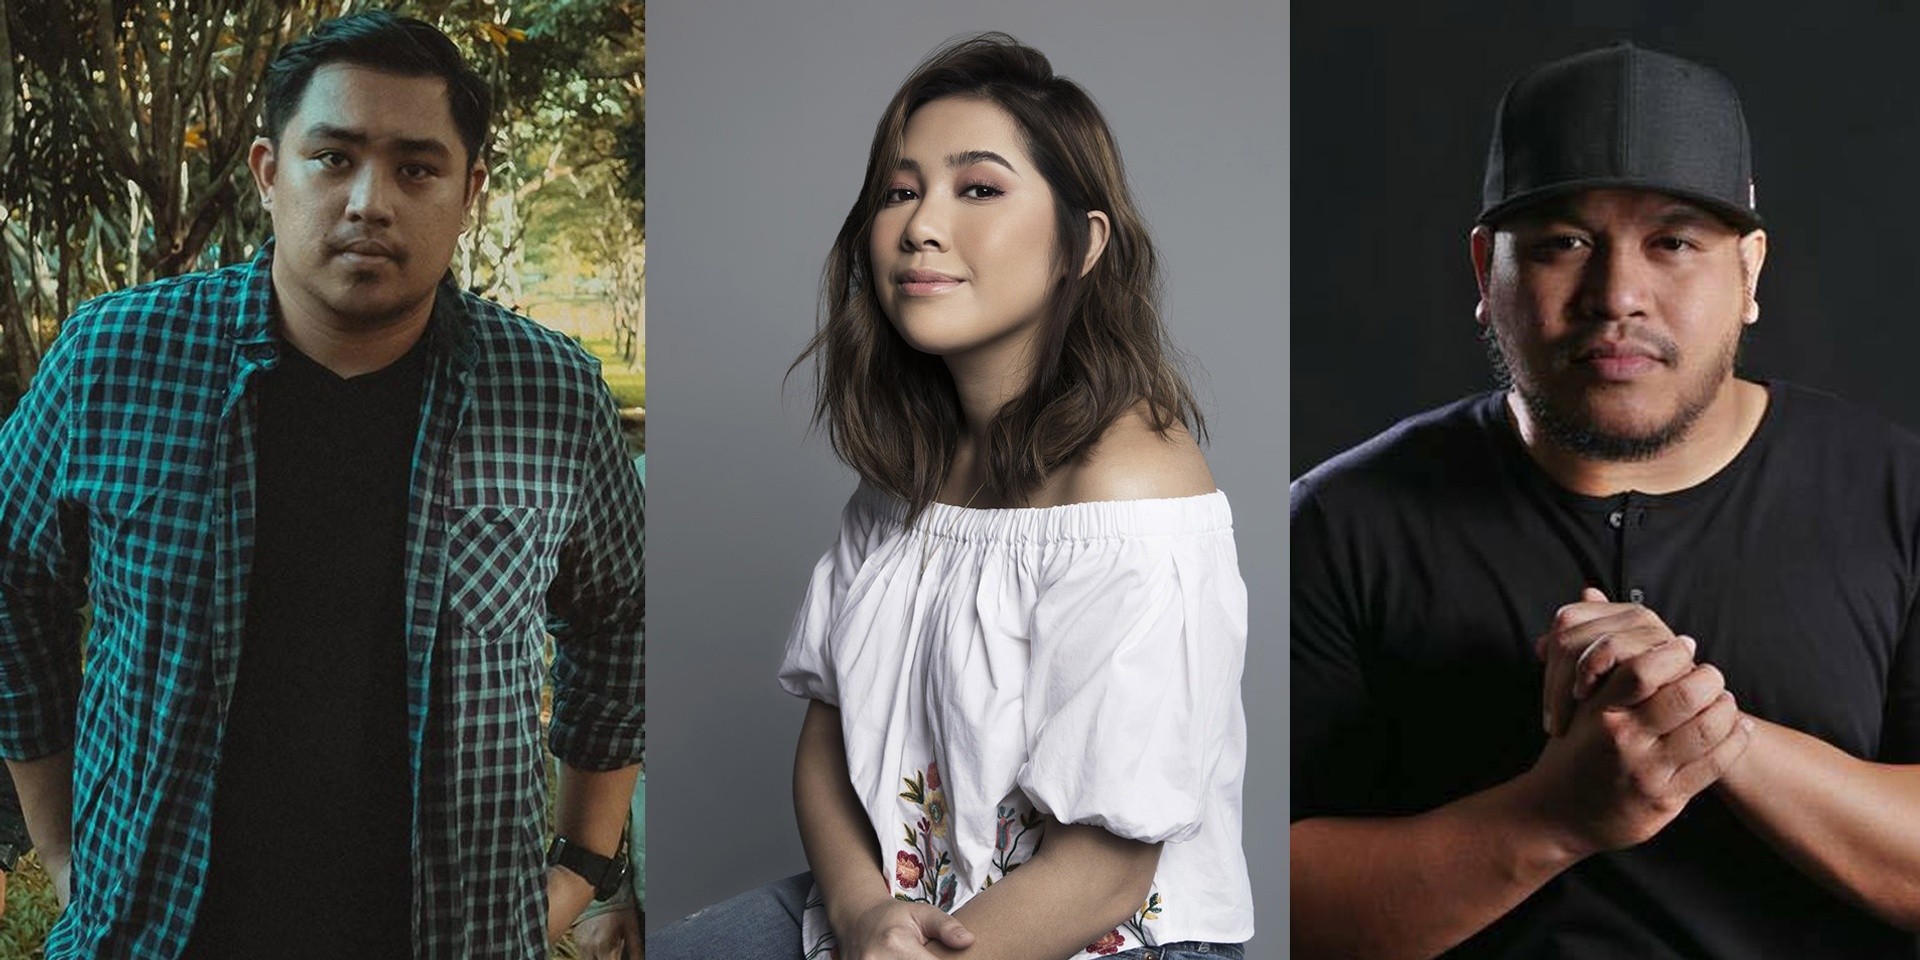 December Avenue, Moira Dela Torre, Quest kick off the holiday season with Christmas carols